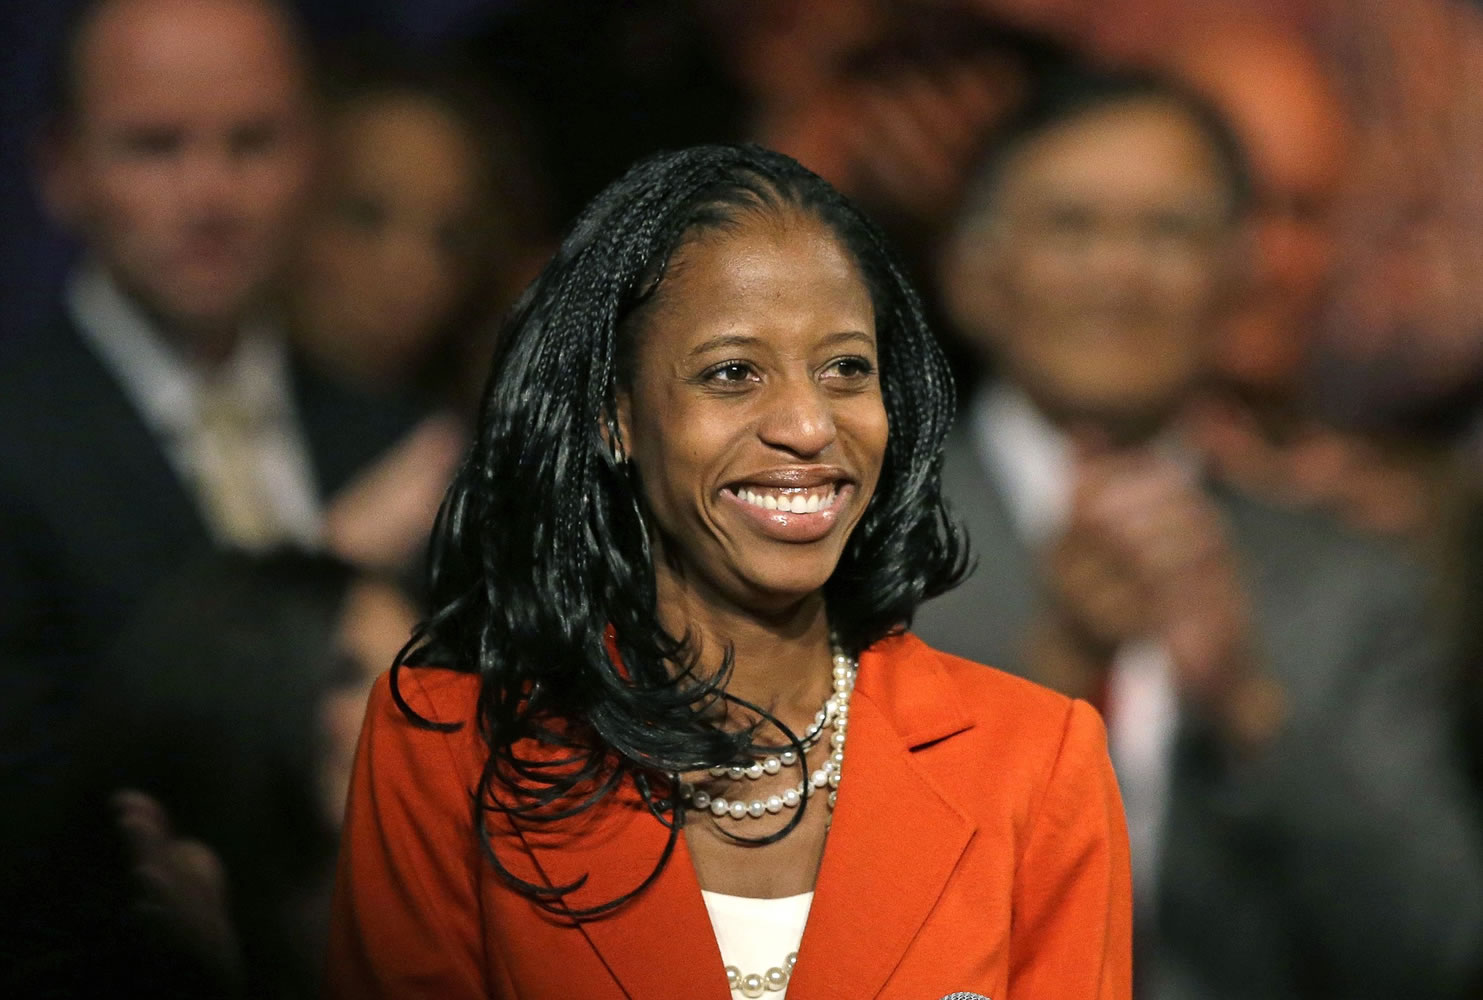 Mia Love, the Republican nominee in Utah's 4th congressional district, smiles after speaking during a rally, in Lehi, Utah.